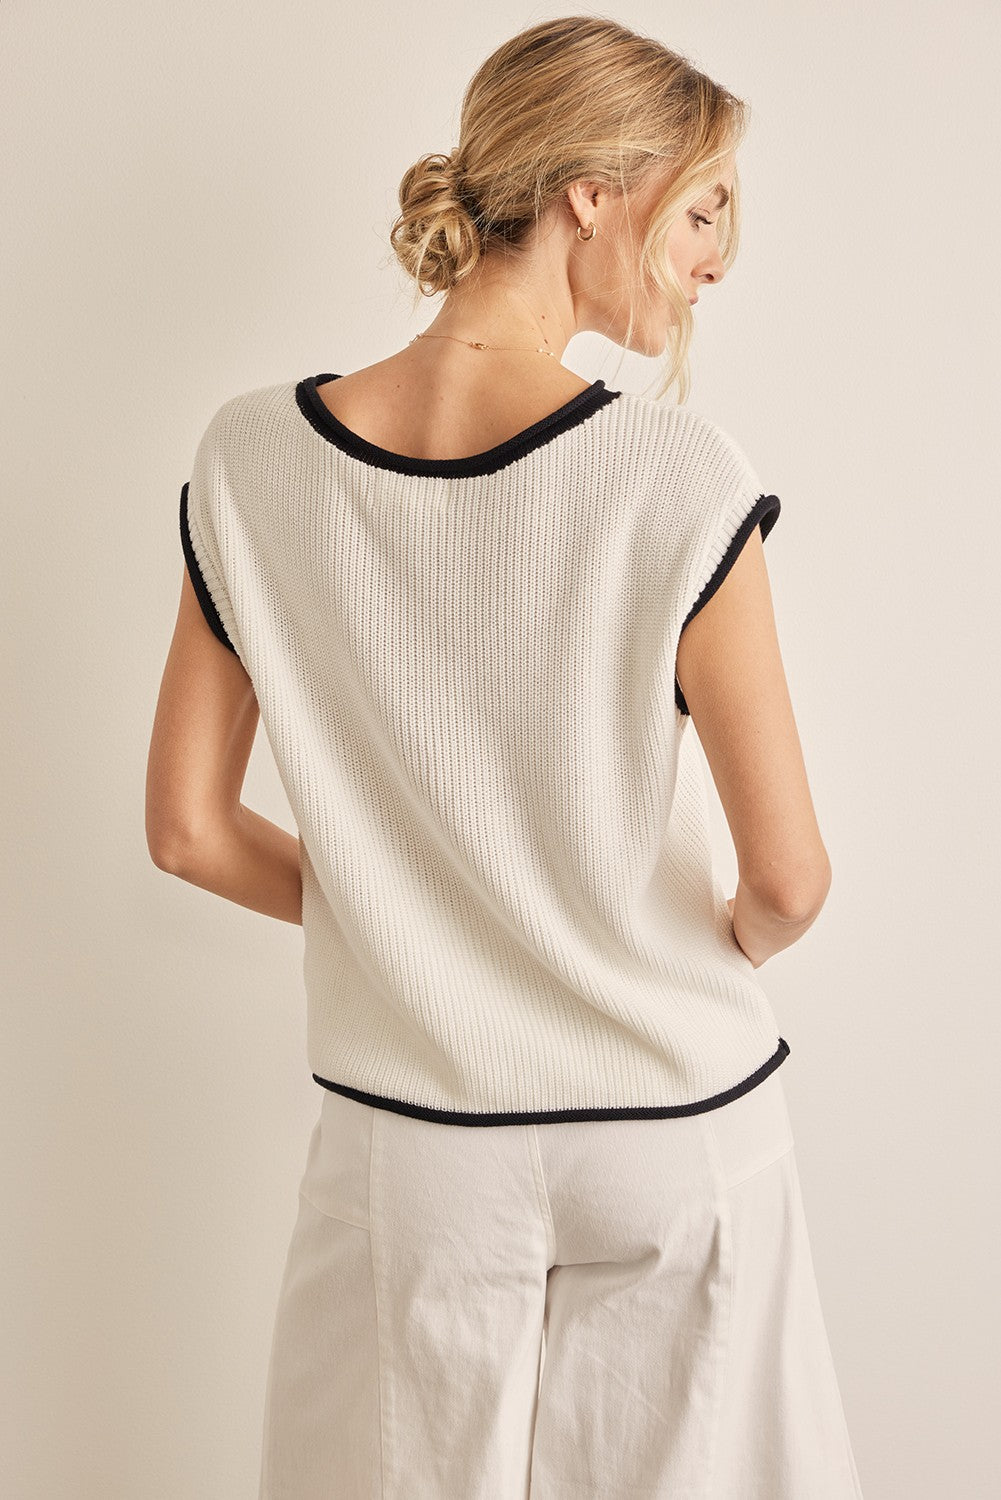 Top Knit Contrast Black/White Carrie